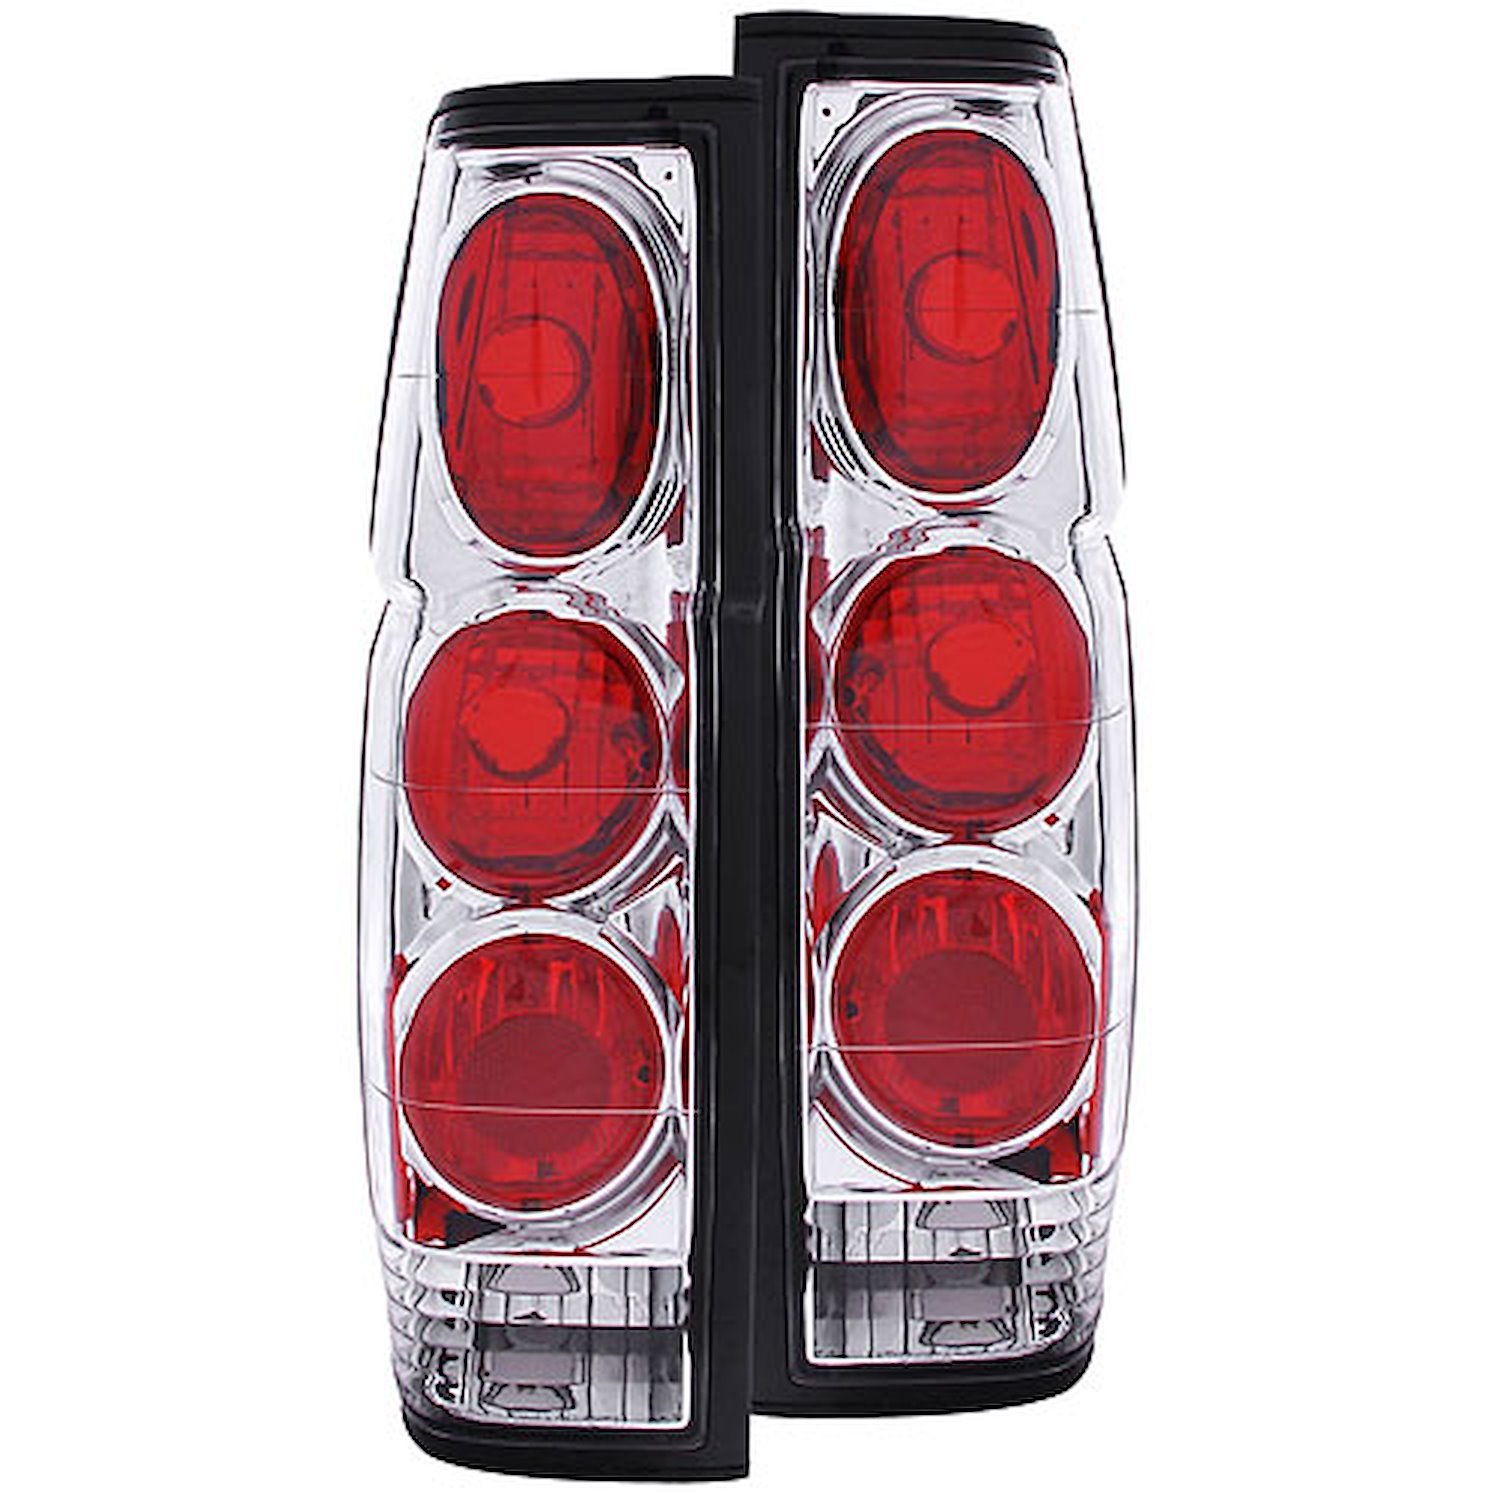 Taillights for 1986-1997 for Nissan Hardbody Truck